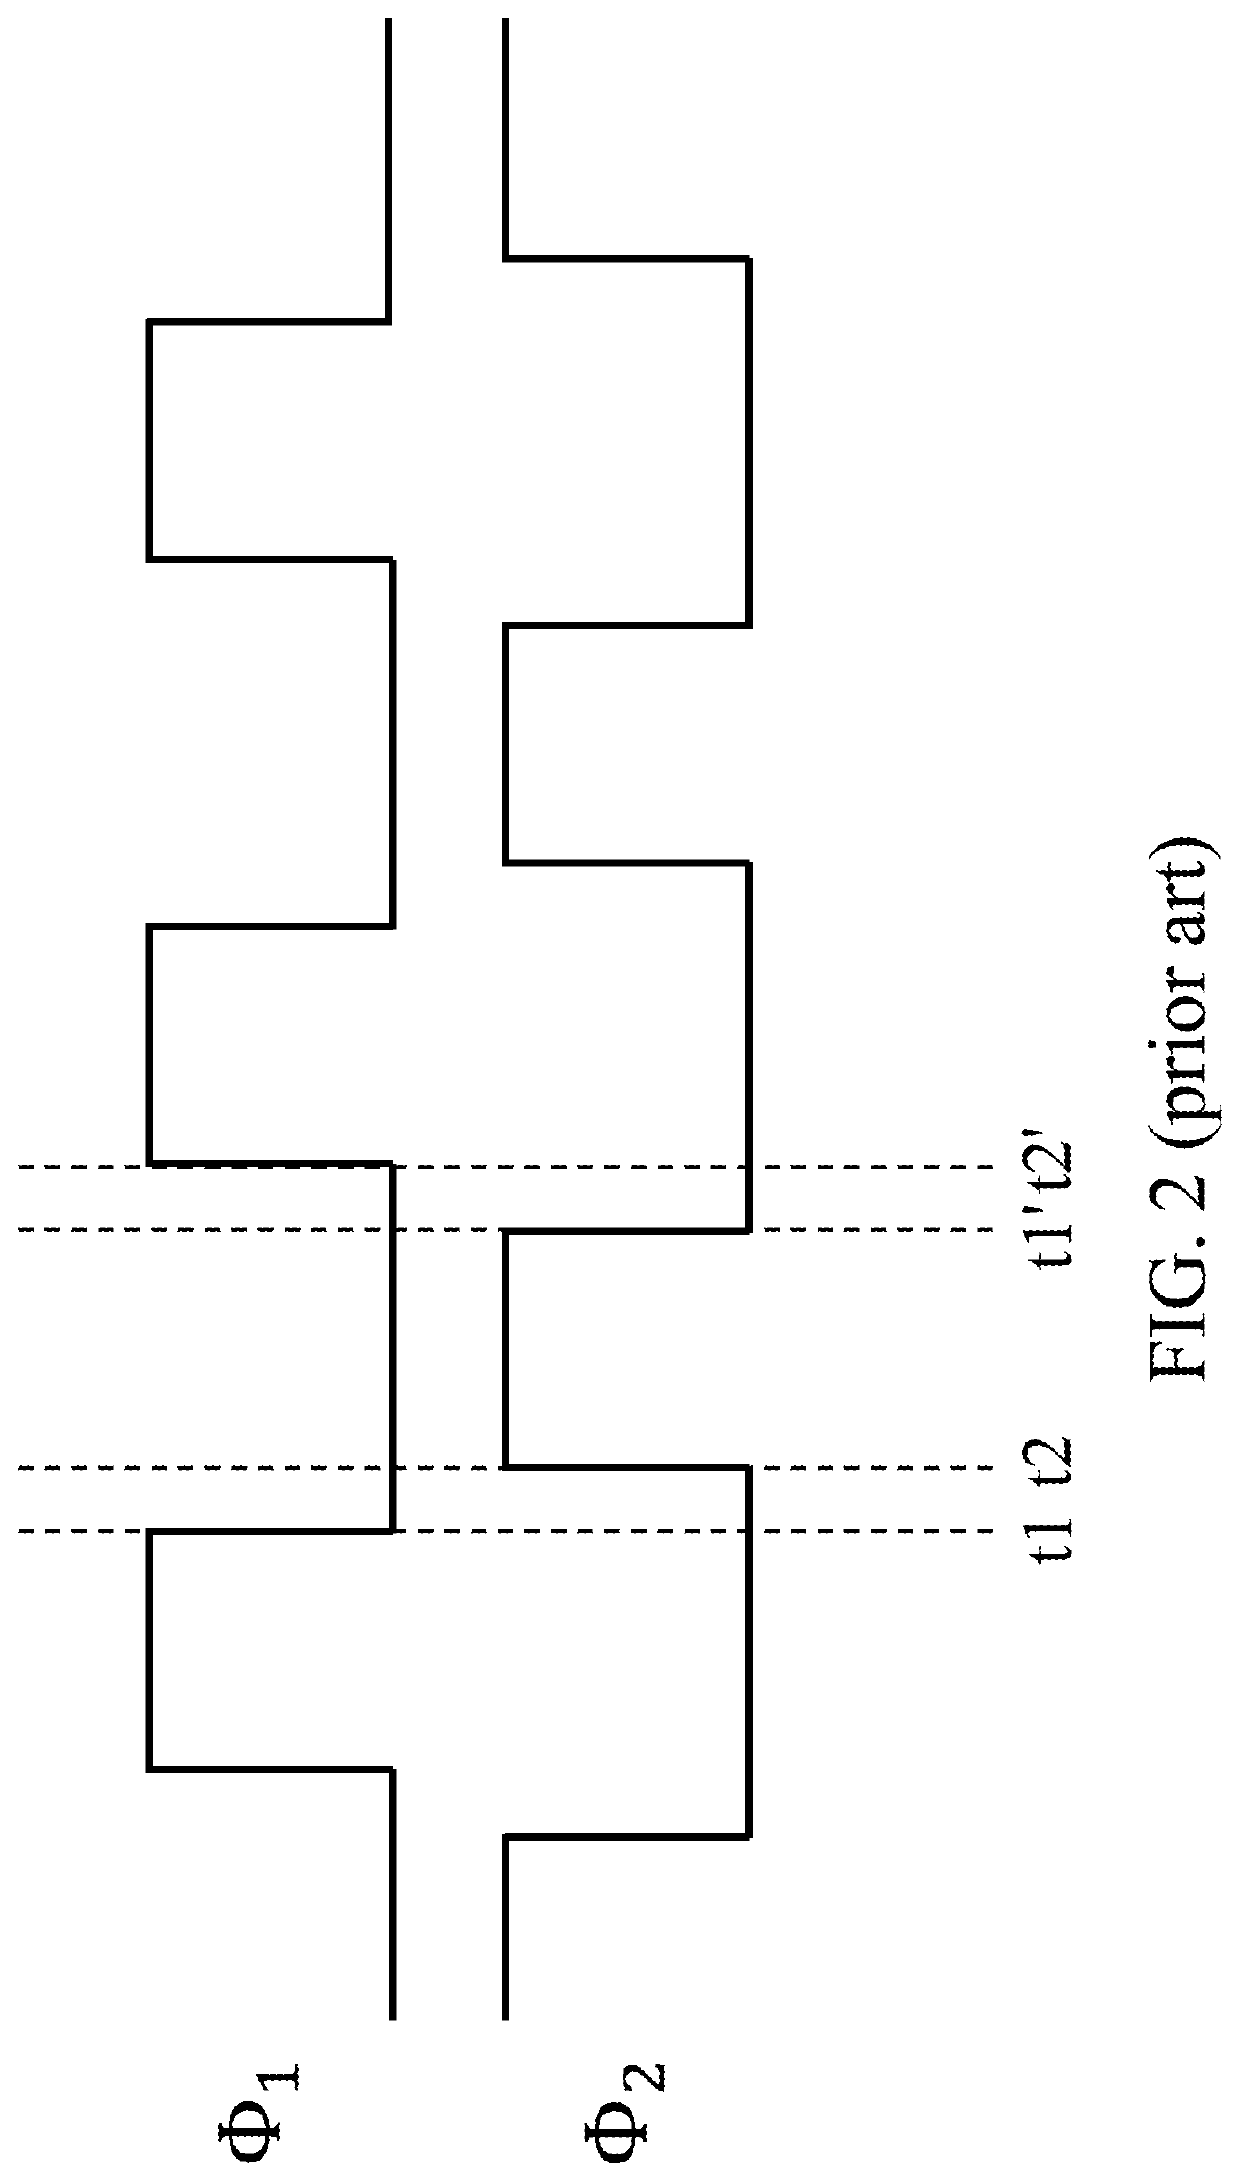 Analog-to-digital converter with low inter-symbol interference and reduced common-mode voltage mismatch